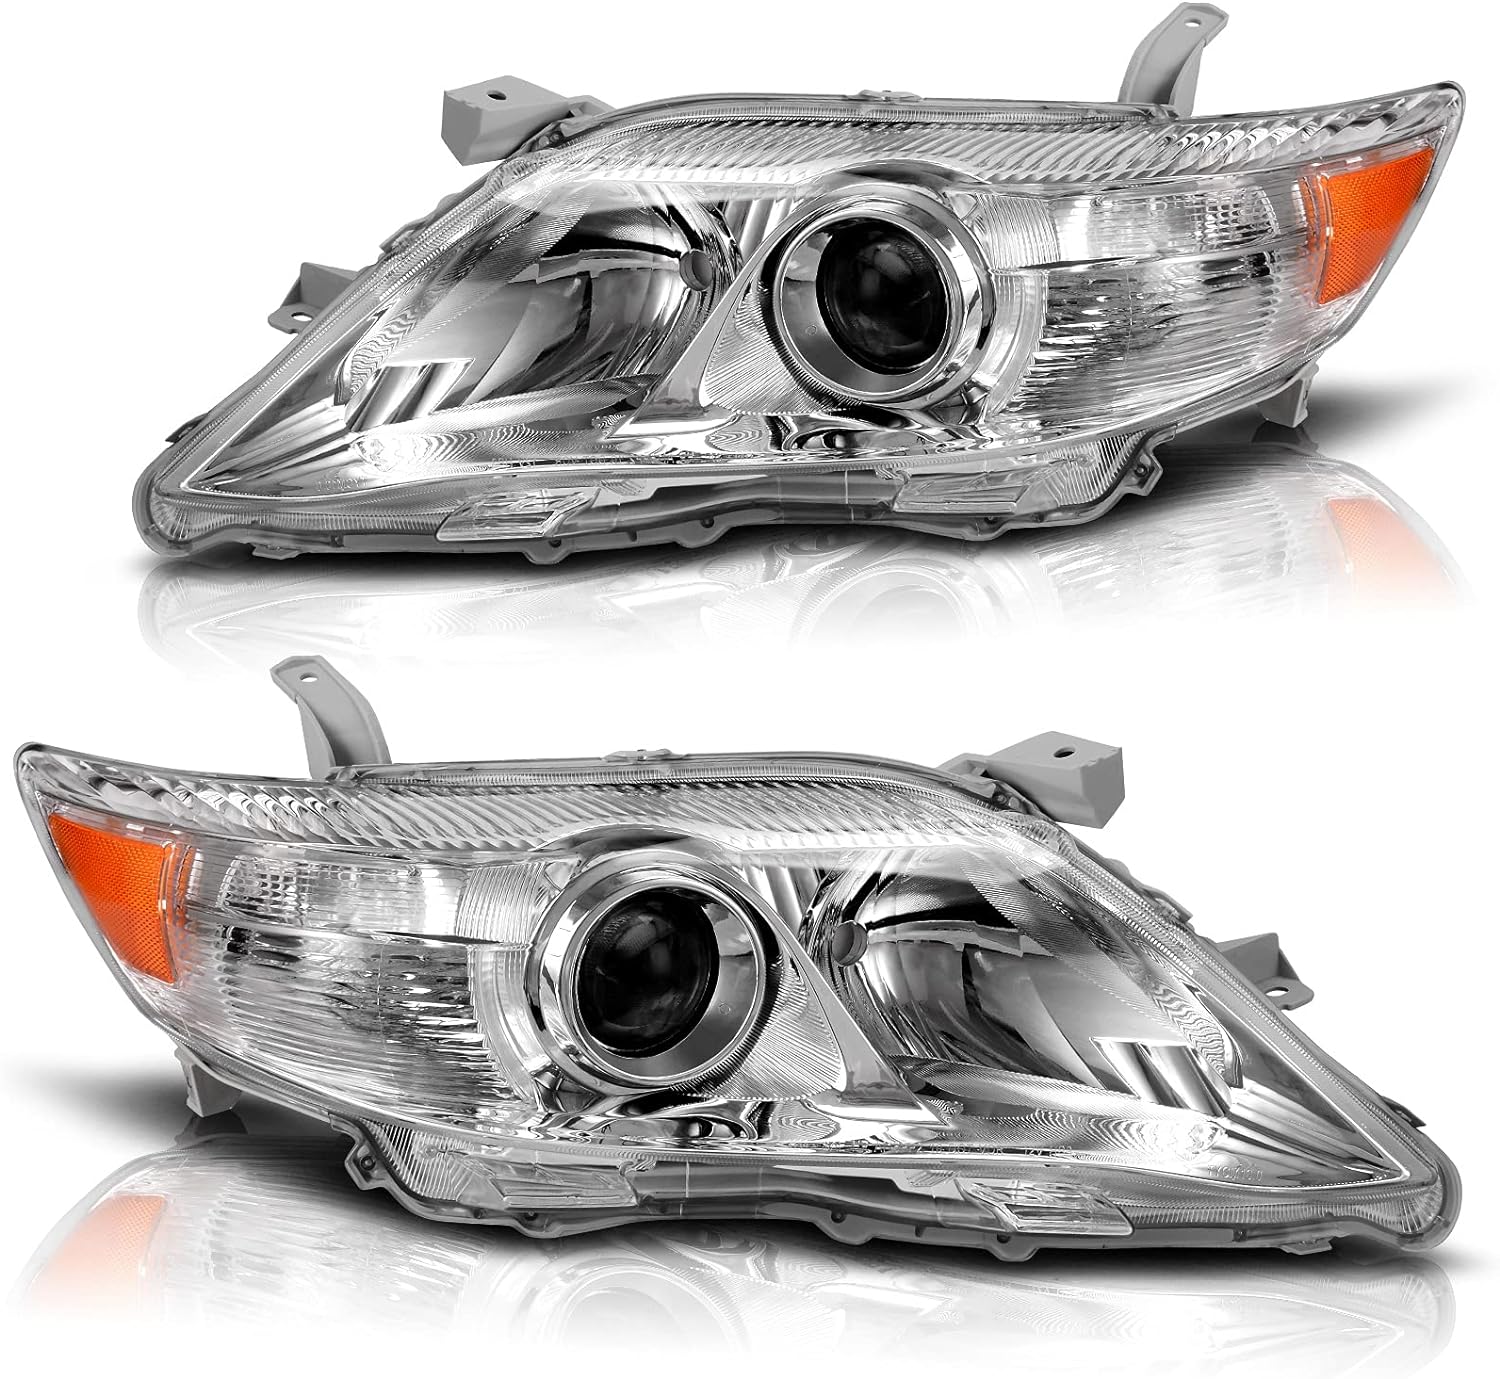 DWVO Headlights Assembly Compatible with 10 11 2010 2011 Camry Headlamp Replacement Pair Driver and Passenger Side Chrome Housing Amber Reflector Headlight